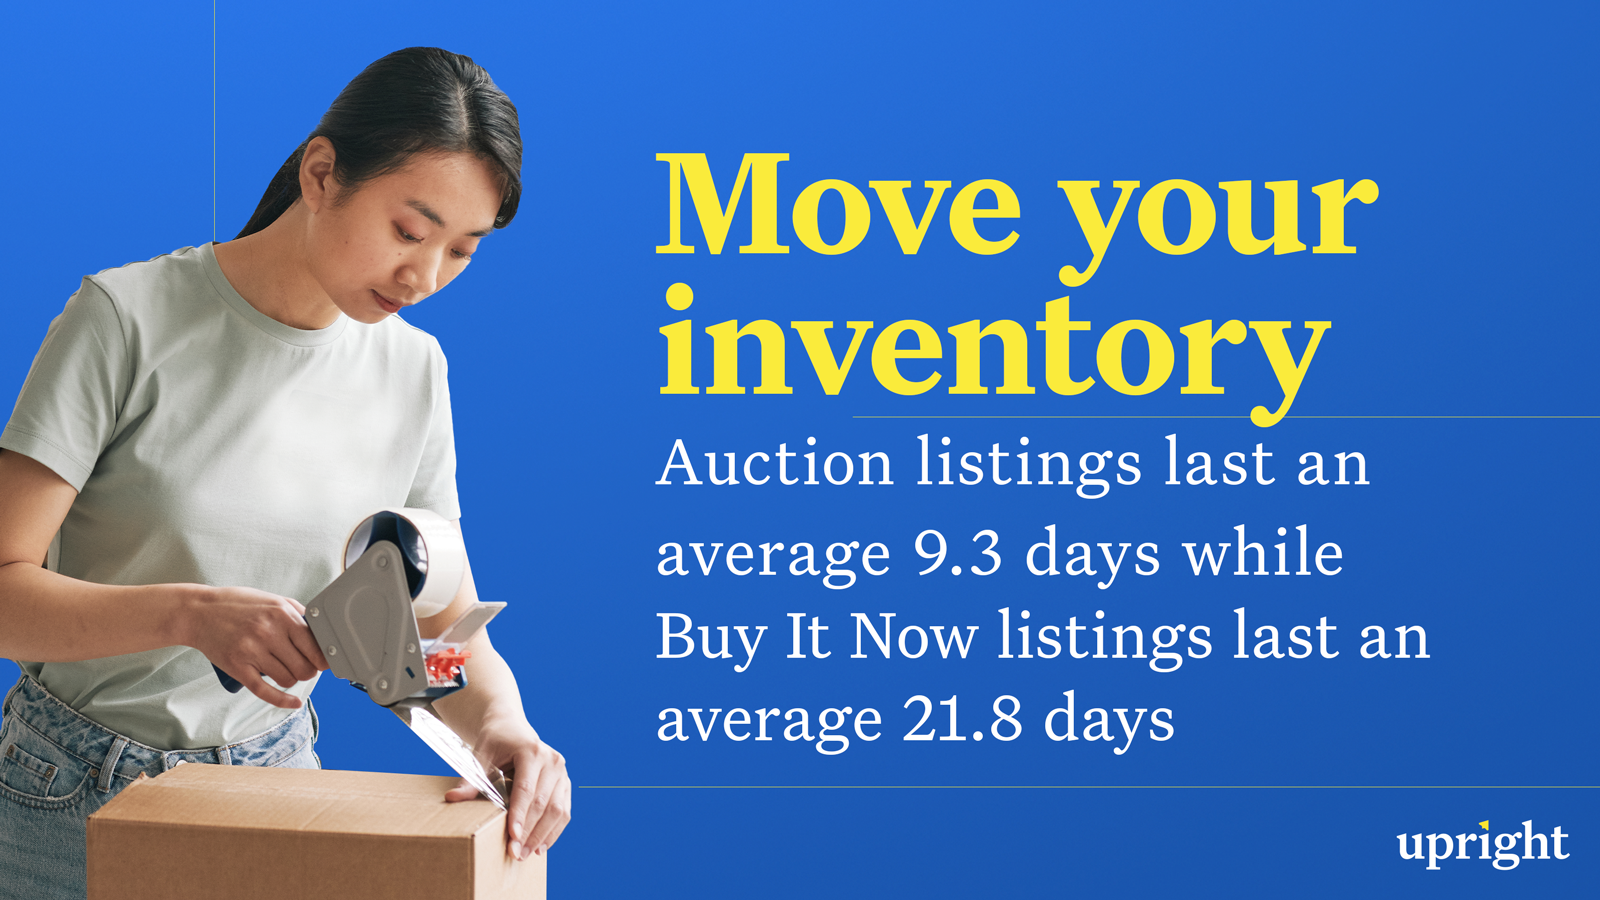 Move your inventory - auction listings last only 9.3 days